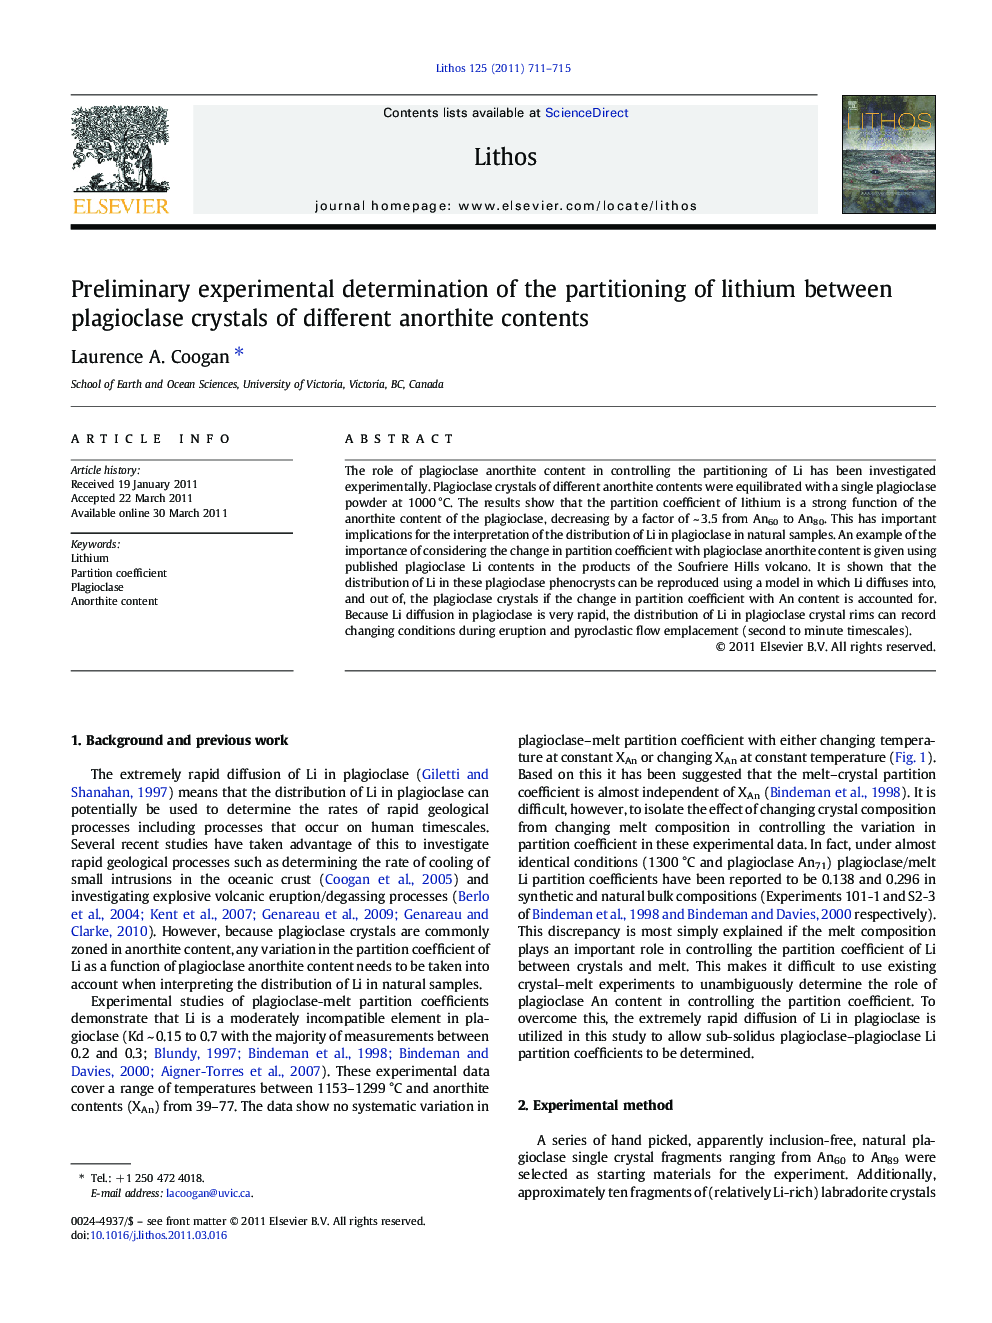 Preliminary experimental determination of the partitioning of lithium between plagioclase crystals of different anorthite contents